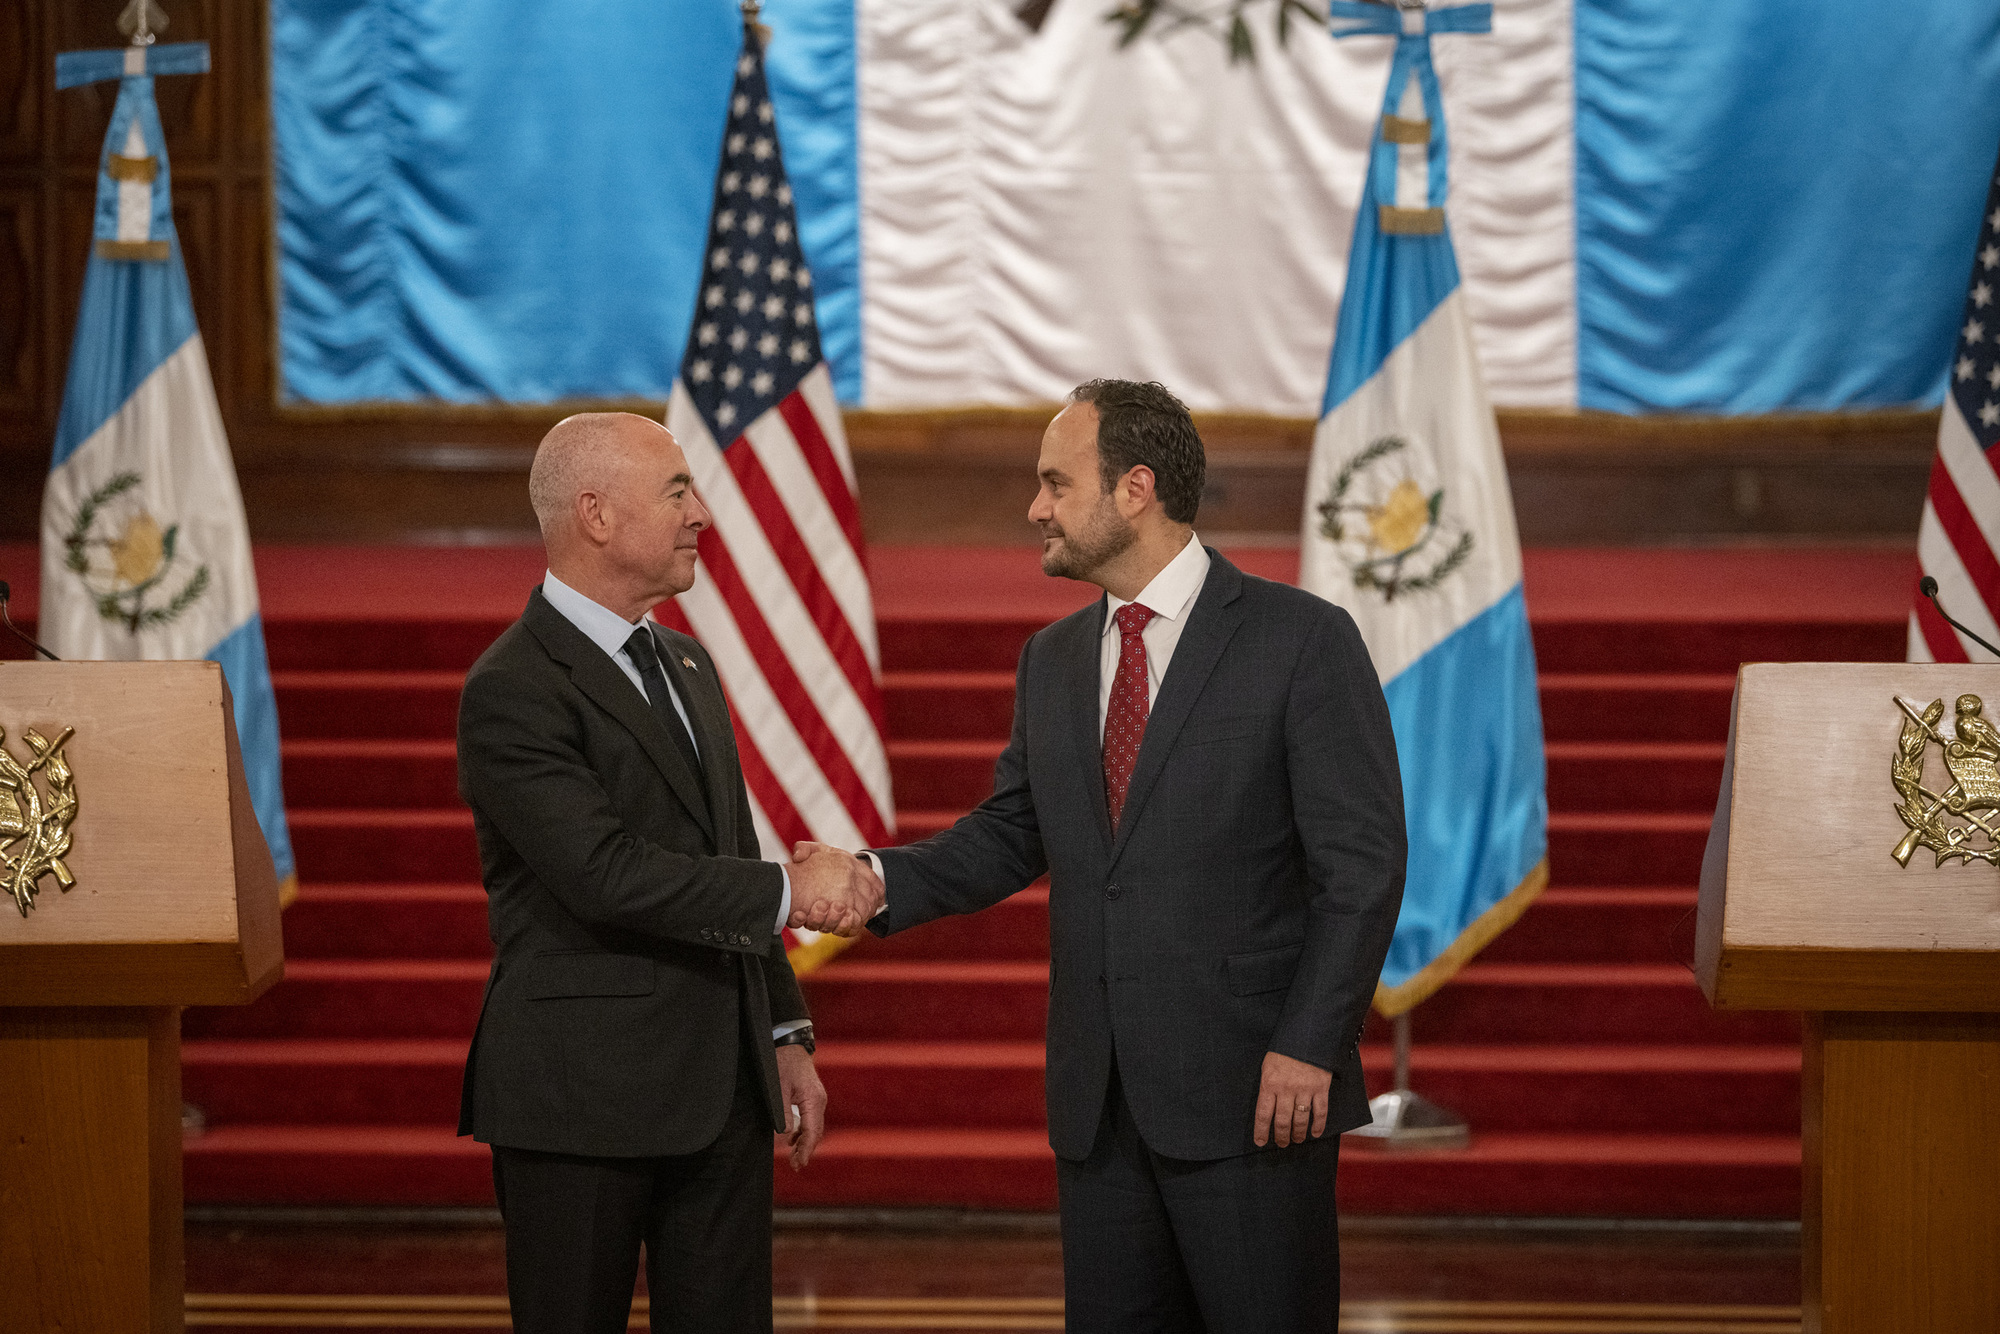 Secretary Mayorkas delivers remarks at a press conference alongside Foreign Minister Brolo  (DHS Photo by Zachary Hupp)